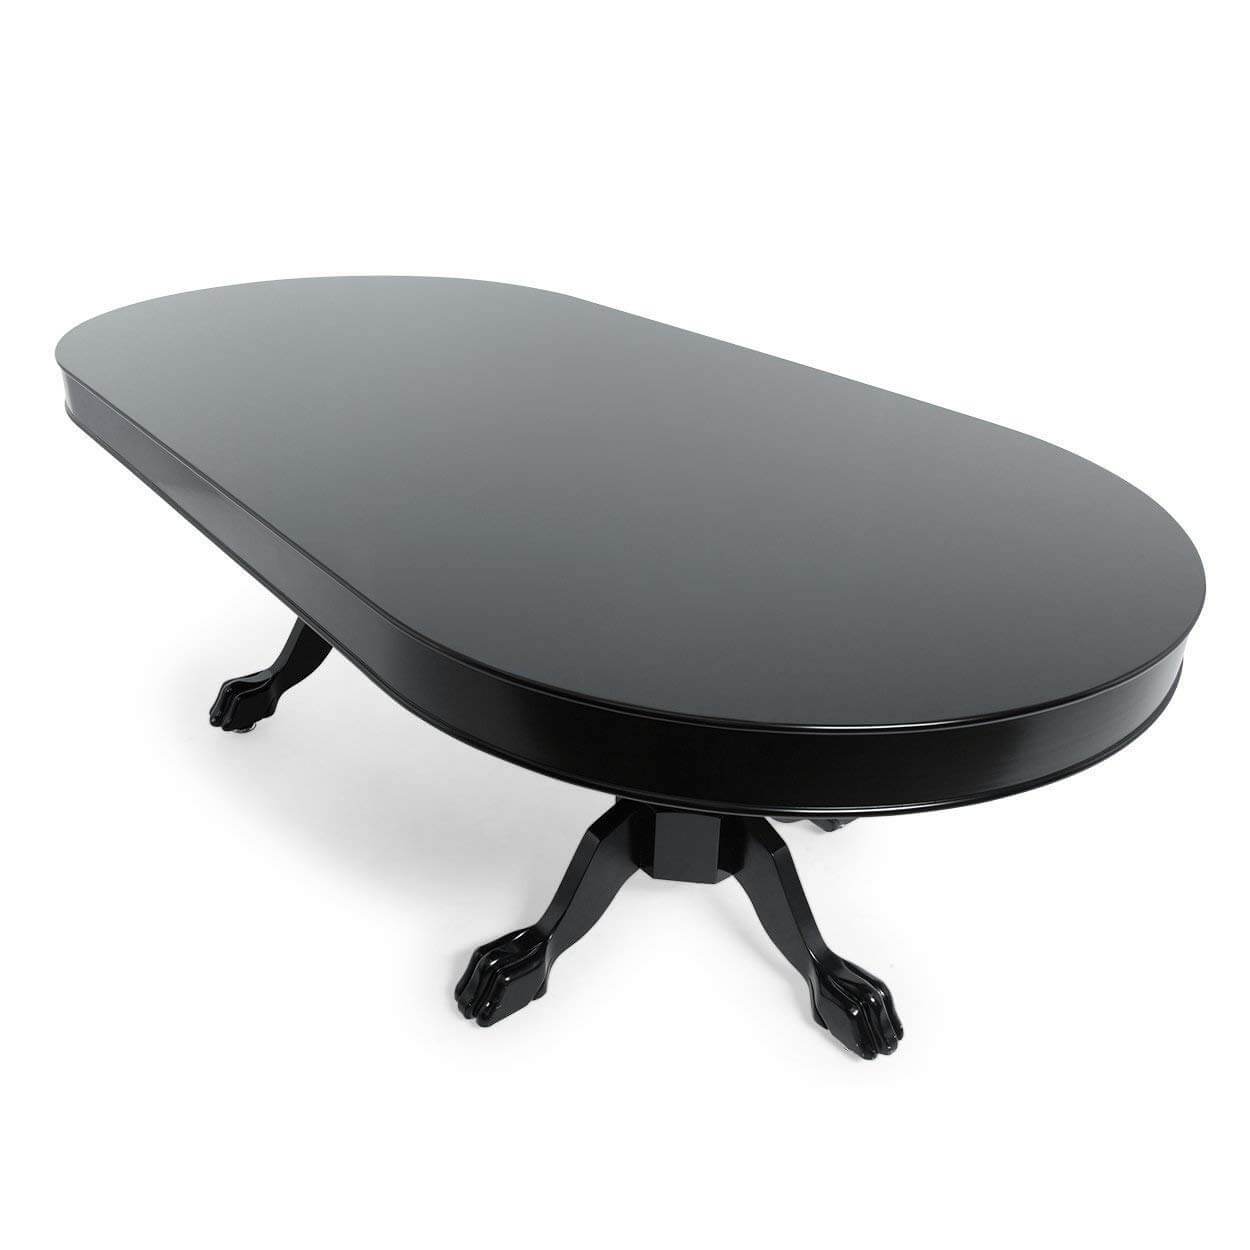 BBO Poker Tables Oval Dining Top - Just Poker Tables